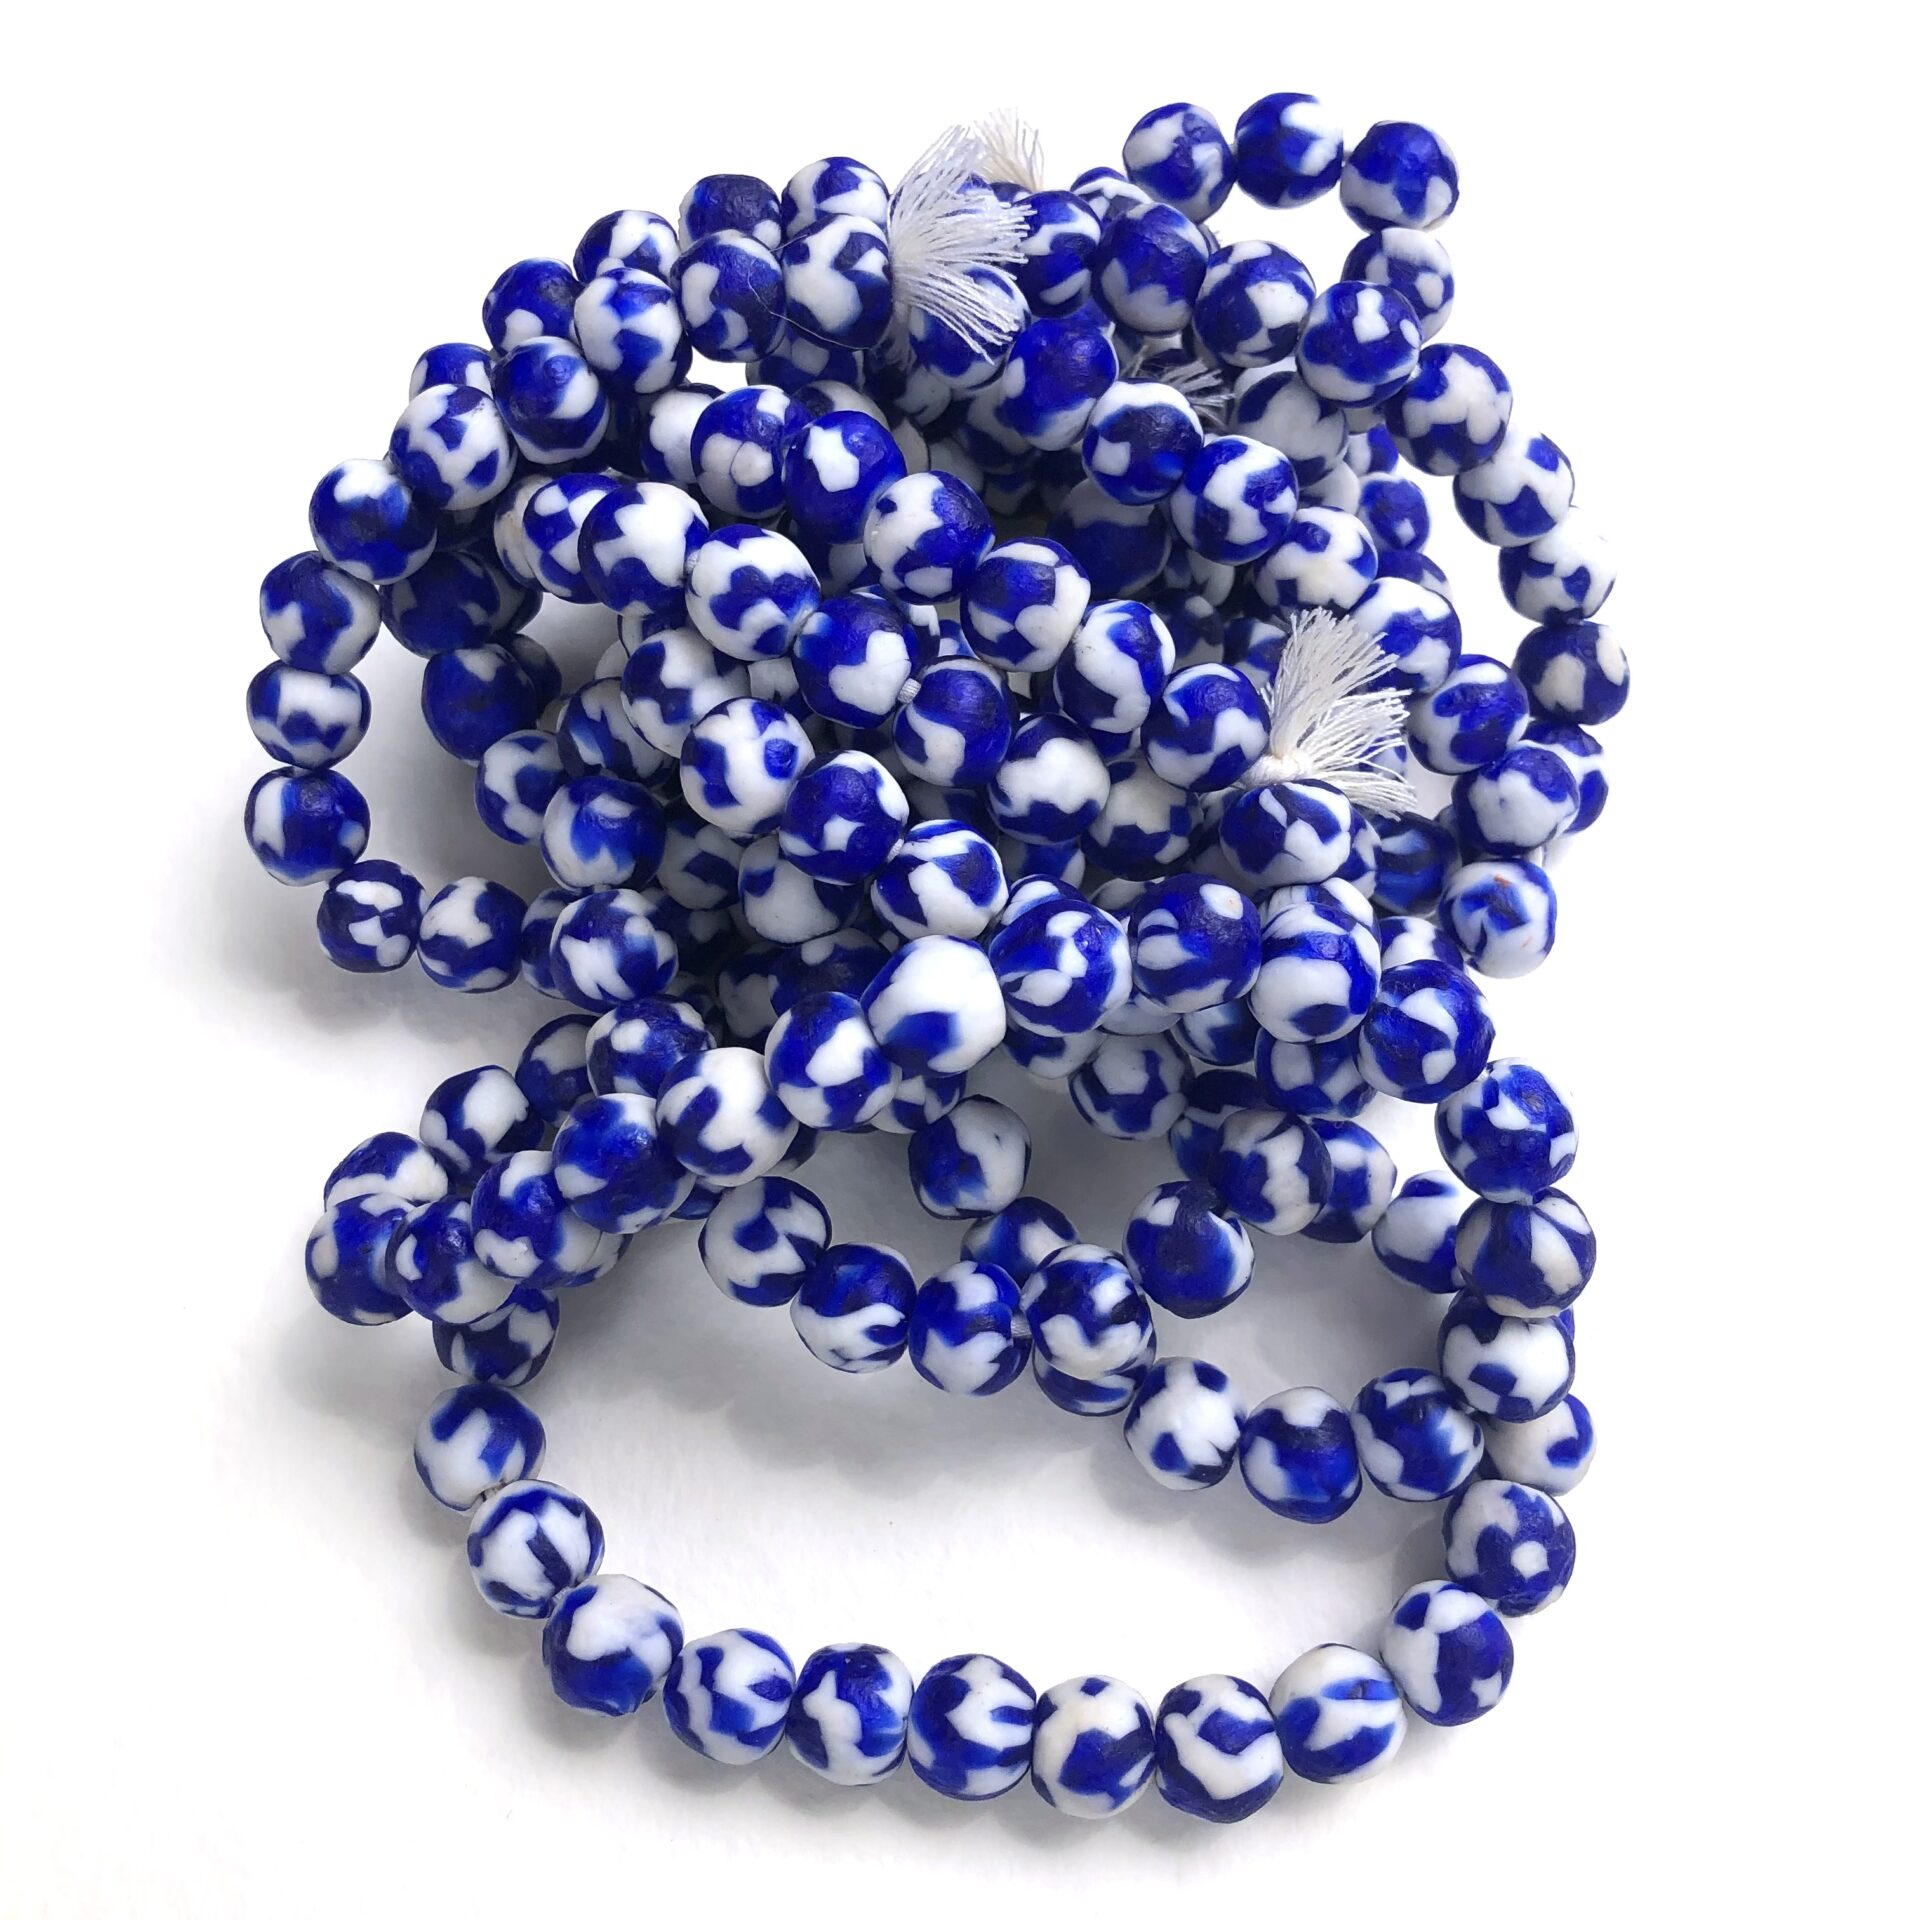 Blue and White Fused Recycled Glass Beads